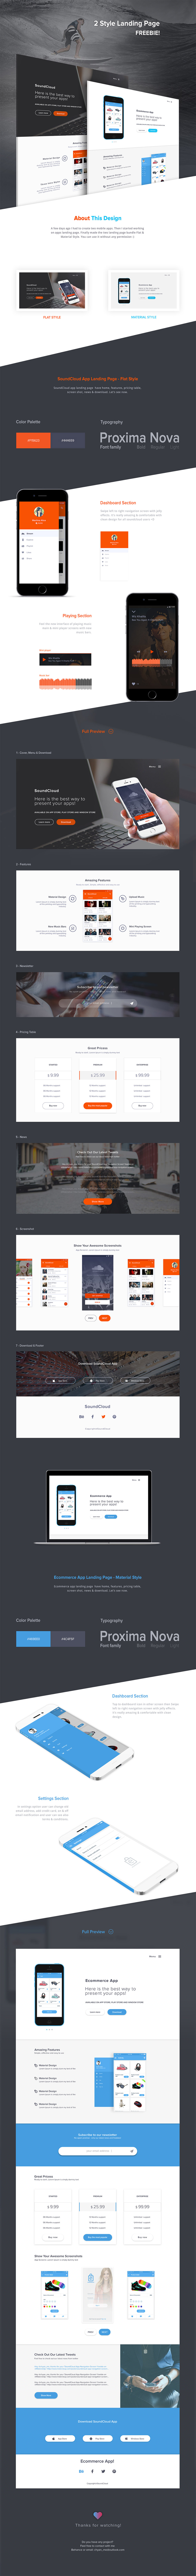 Flat Material Style Website Landing Page Free PSD Set